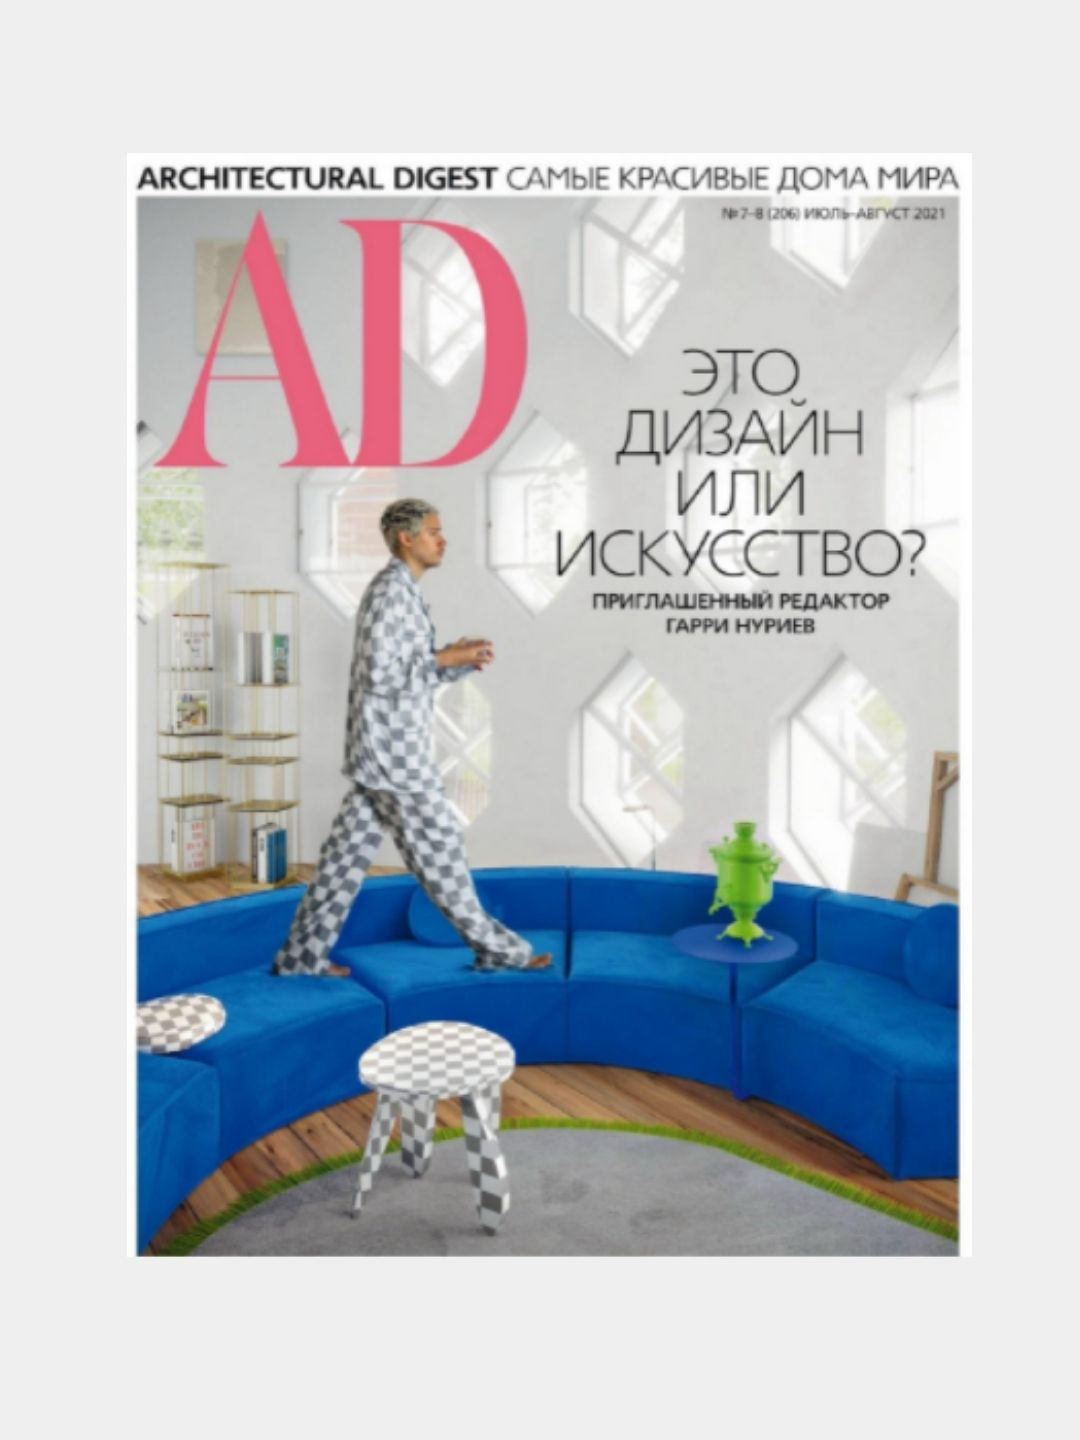 «AD. Architectural digest»